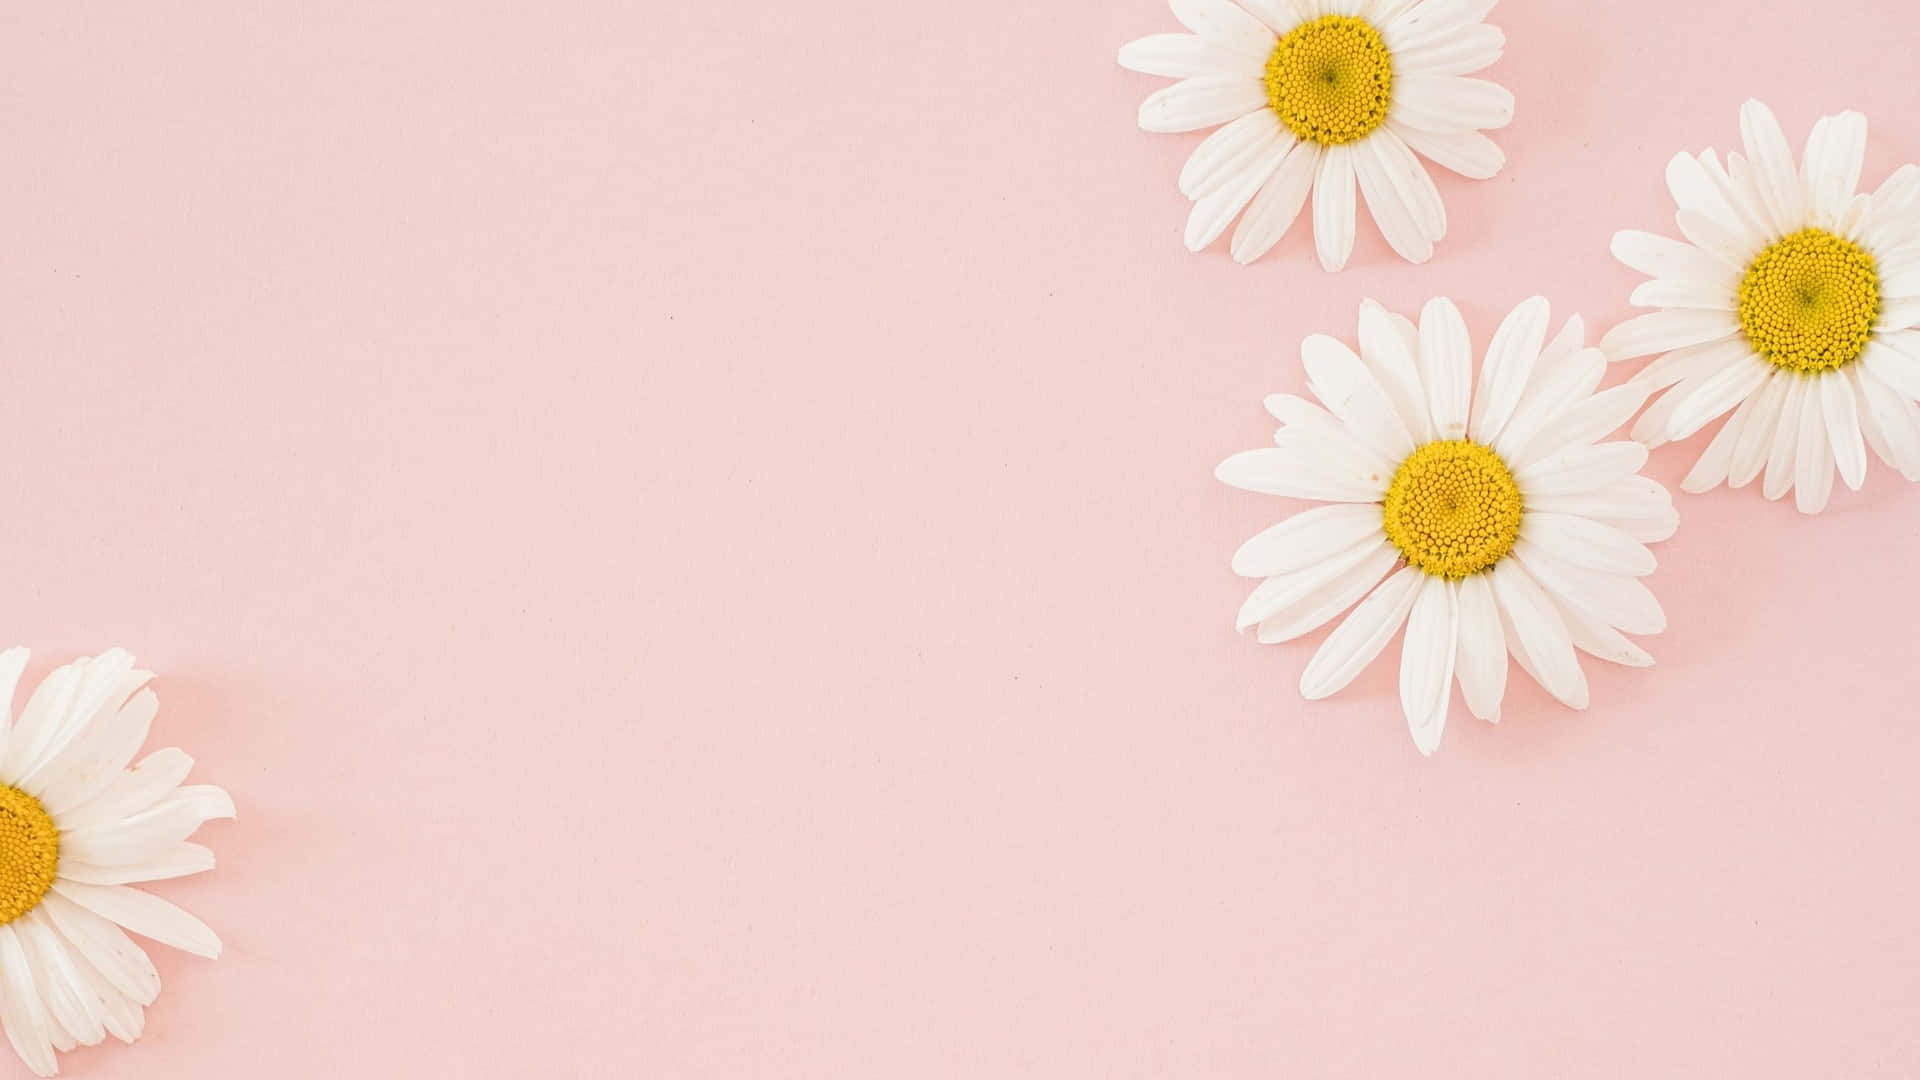 White daisies on a pink background - Light pink, soft pink, daisy